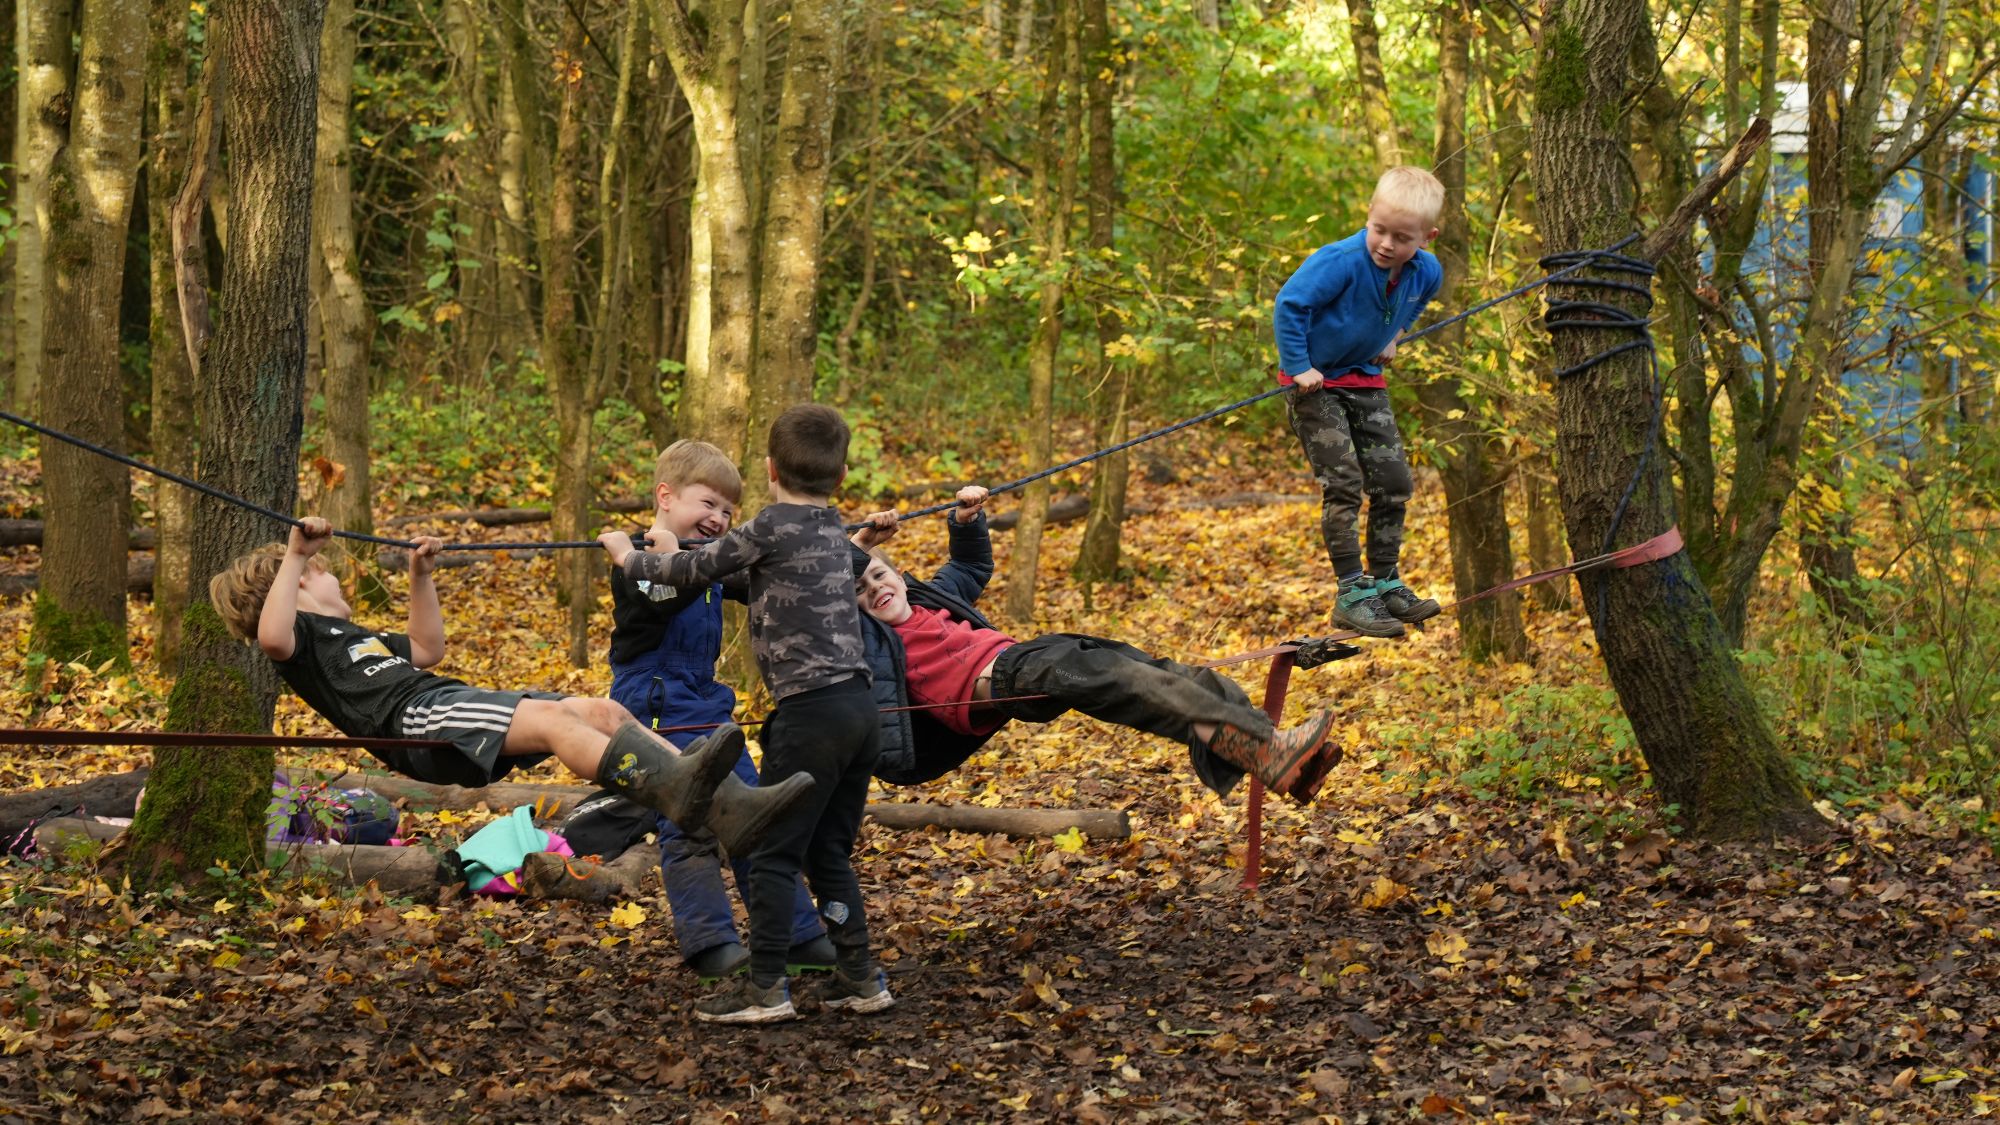 A group of boys playing on the natural woodland playground.